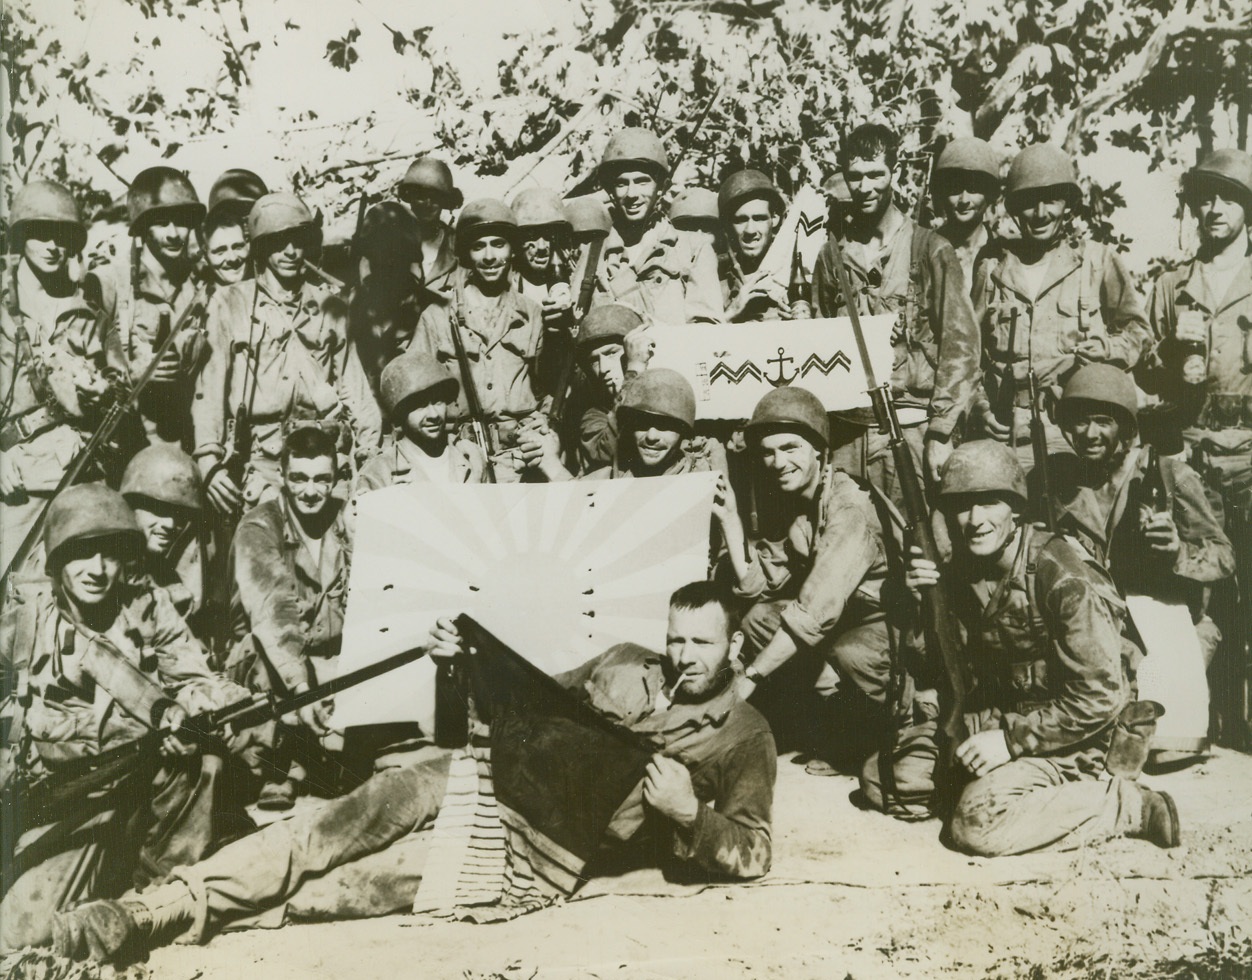 DISPLAY OF CAPTURED SOUVENIRS, 12/9/1943. MAKIN ISLAND—Back from the battle front with their captured souvenirs are the men of the 165th Infantry, the old “Fighting 69th”. Pictured are a Japanese flag and Japanese marine insignia taken at [illegible] grove, Makin Island.Credit: Official U.S. Army Signal Corps photo from Acme;